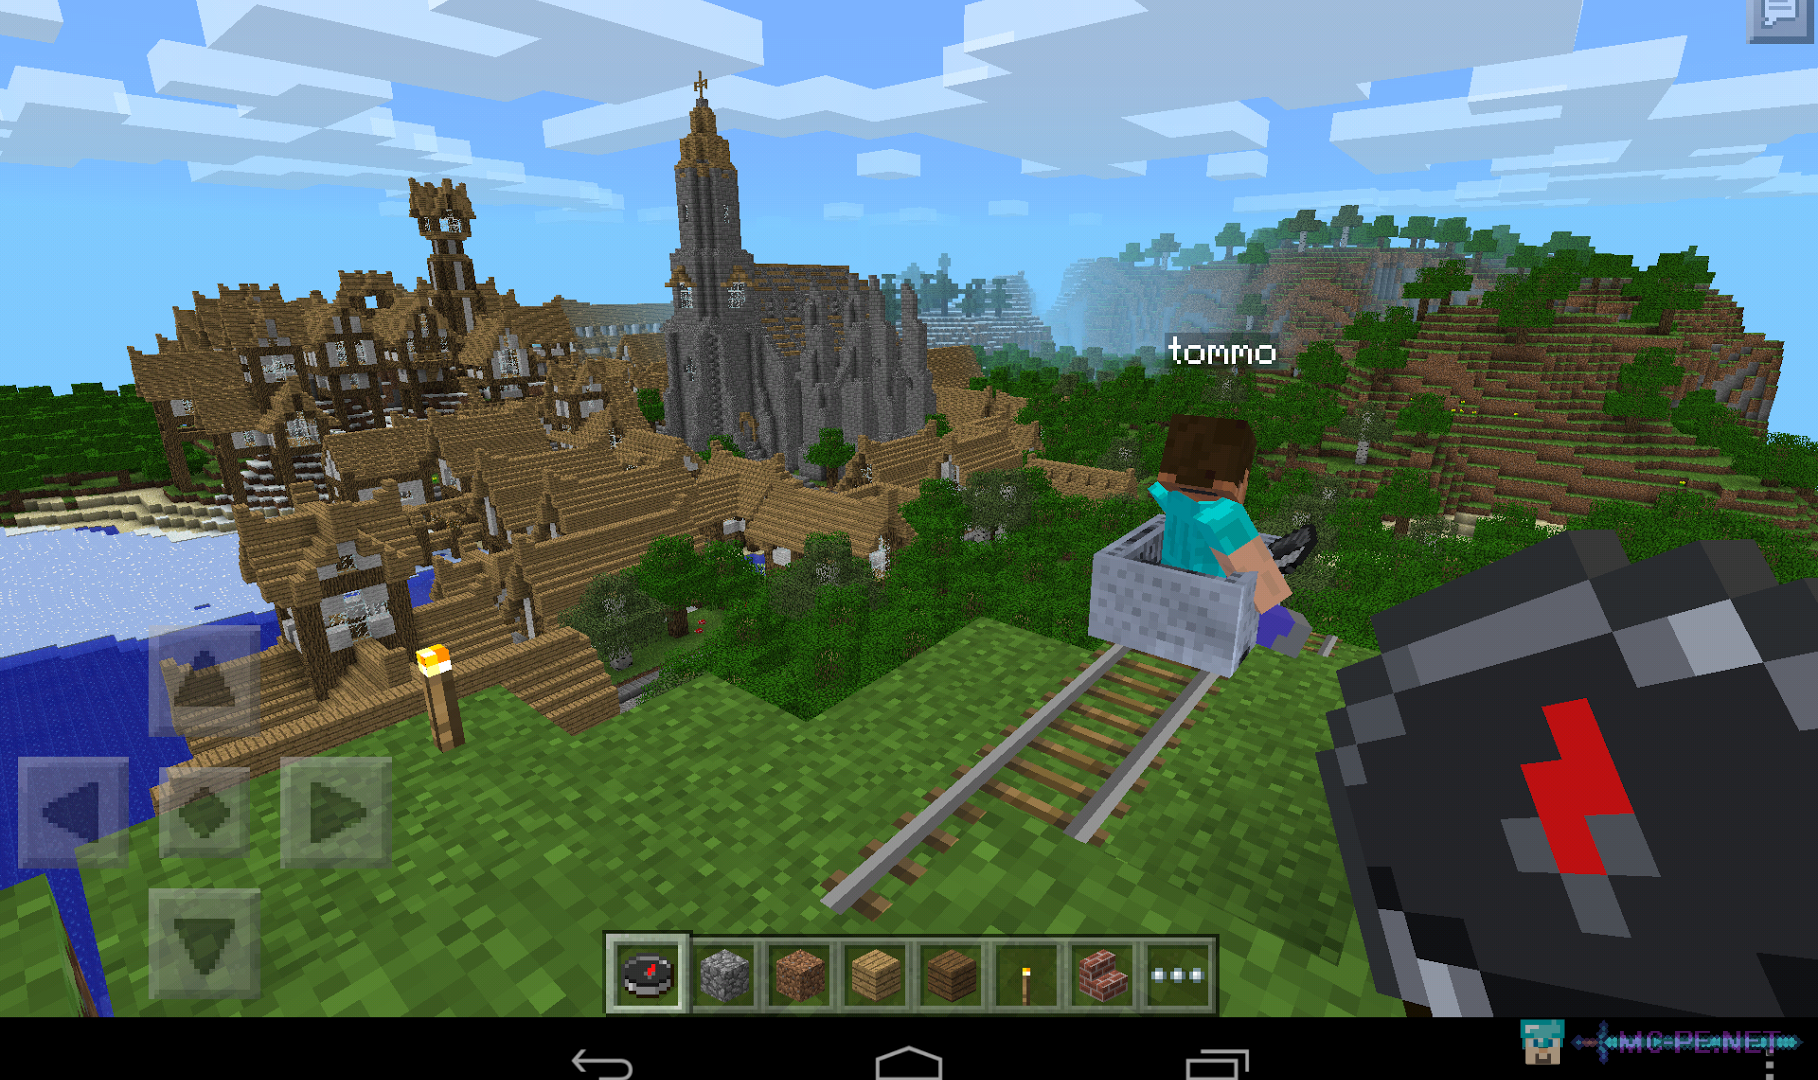 minecraft pocket edition free download for pc windows 10